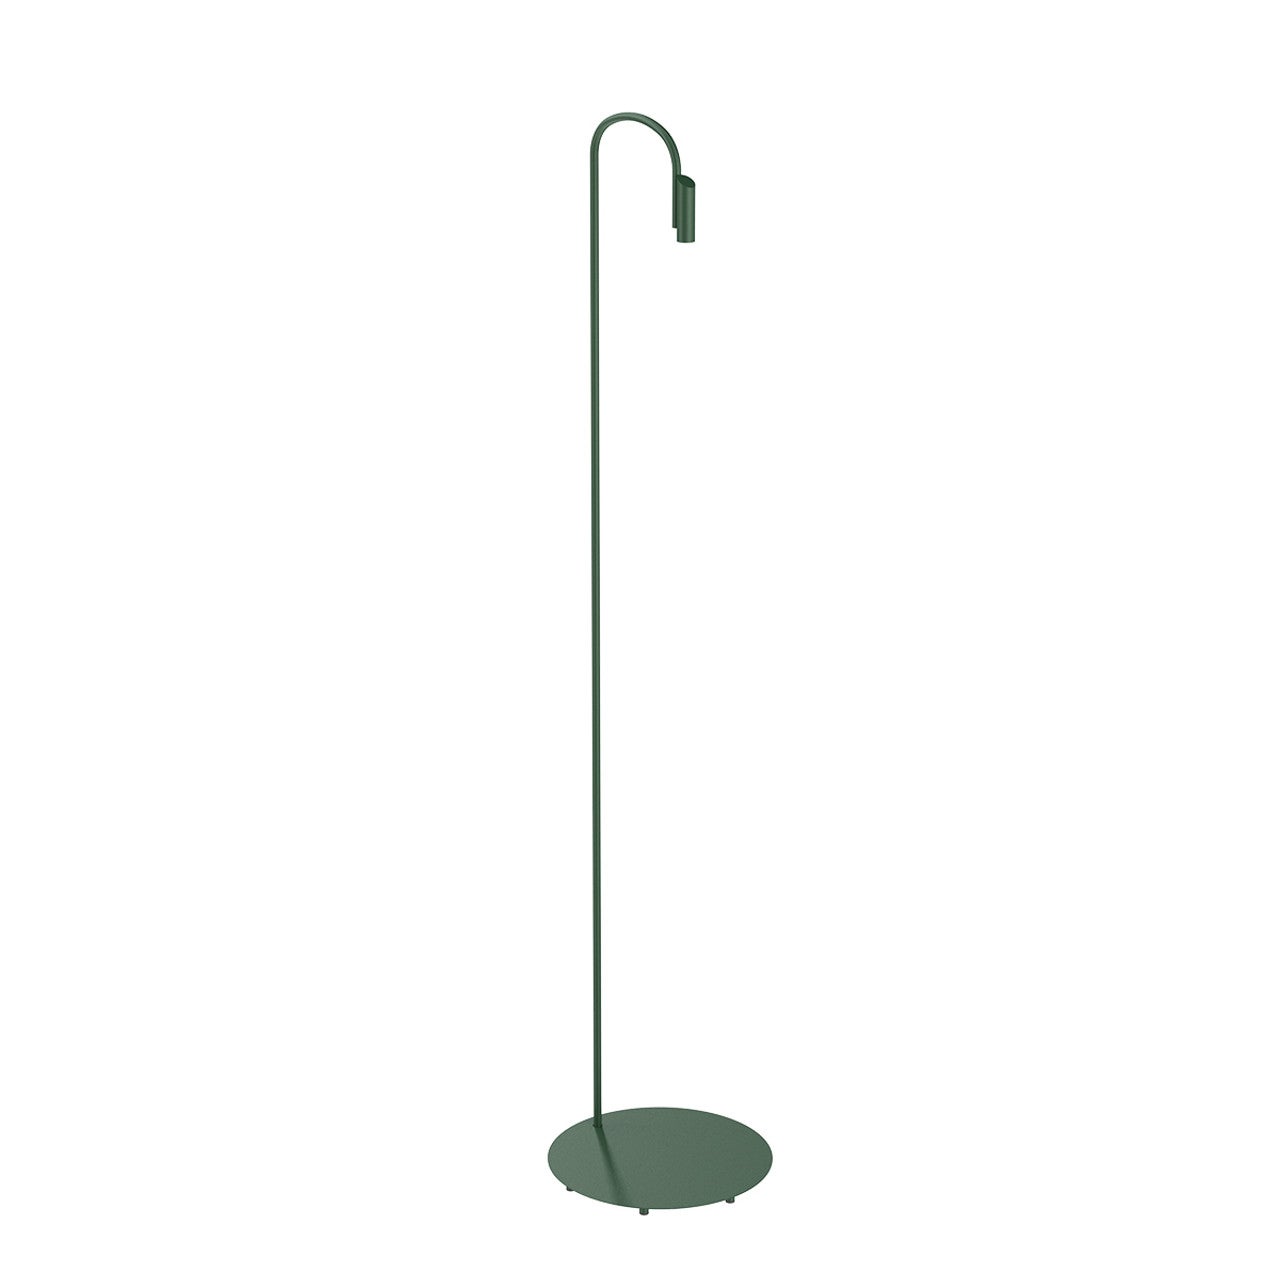 Flos Caule 3000K Model 5 Outdoor Floor Lamp in Forest Green with Regular Shade For Sale